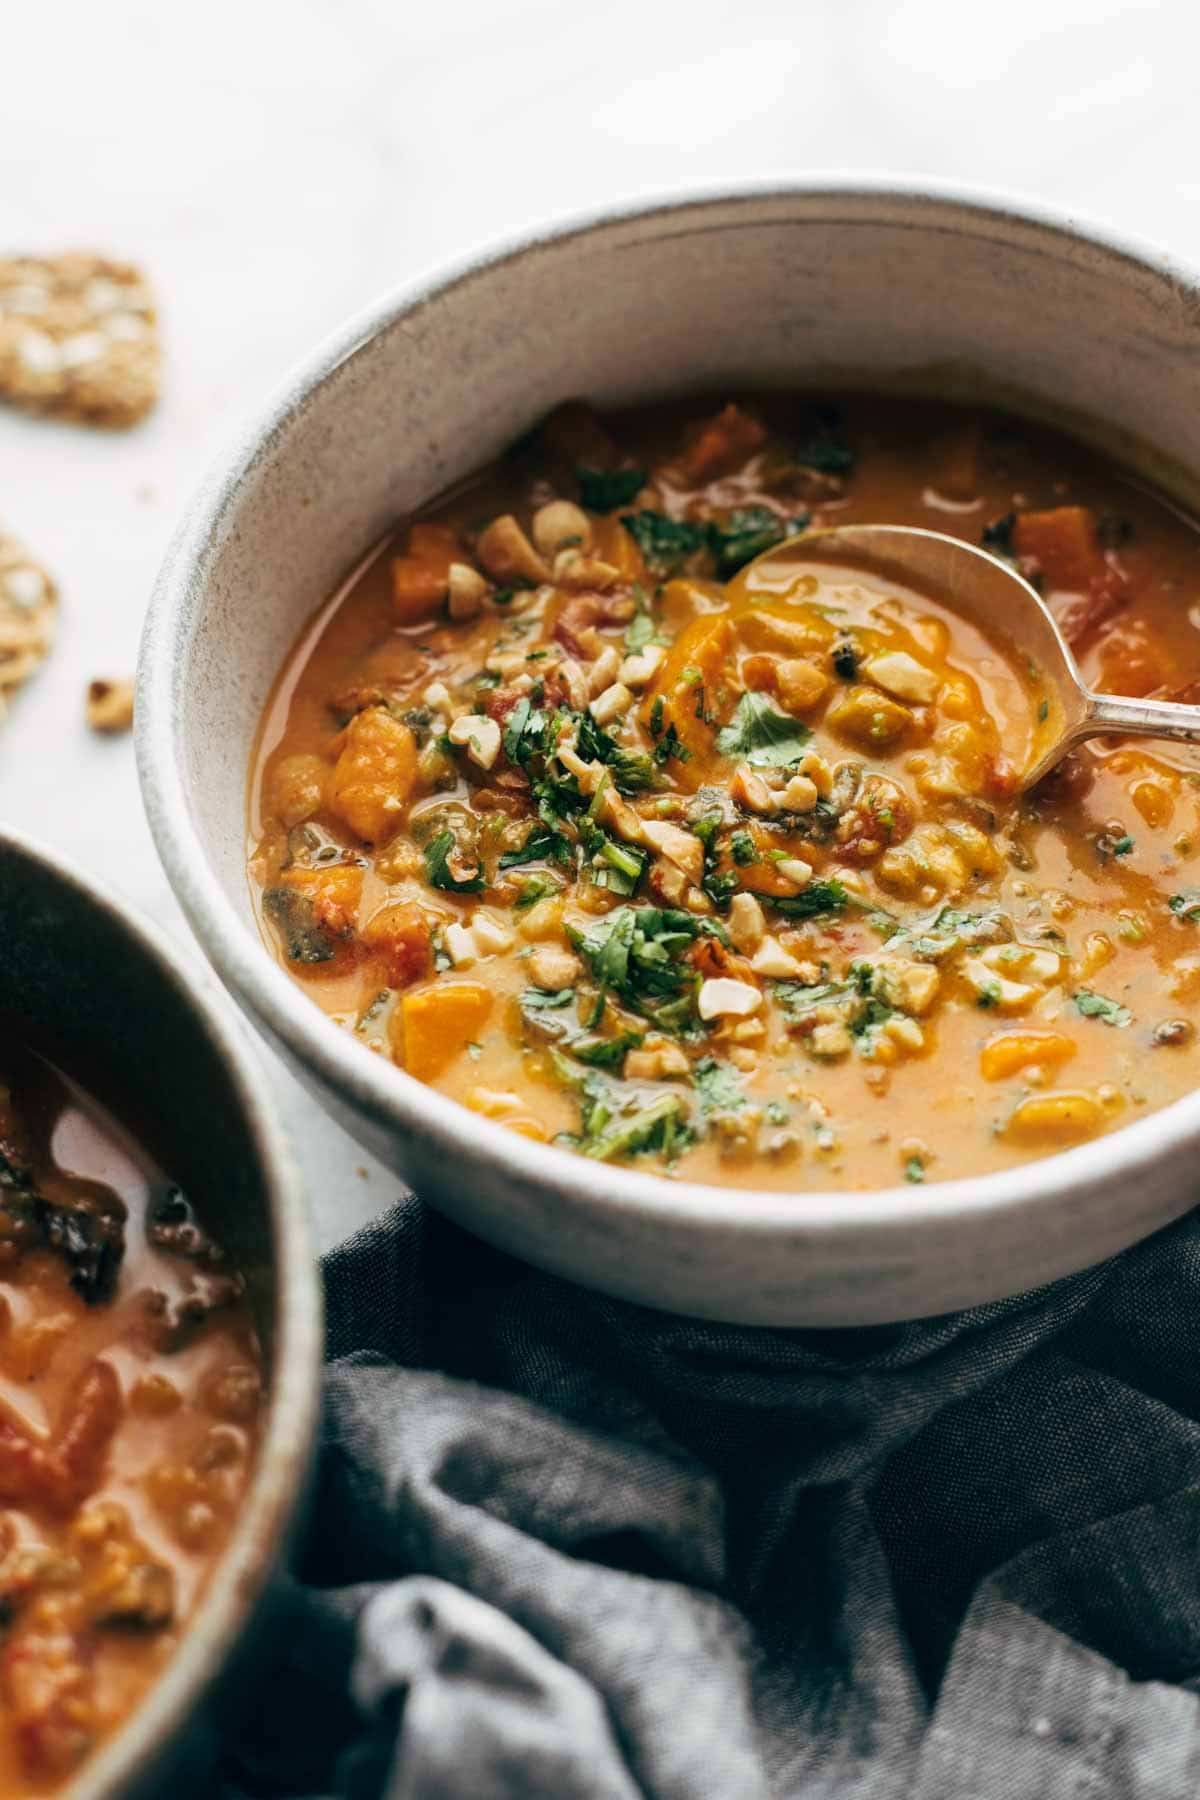 A spoon in a bowl of Spicy Sweet Potato Peanut Stew.